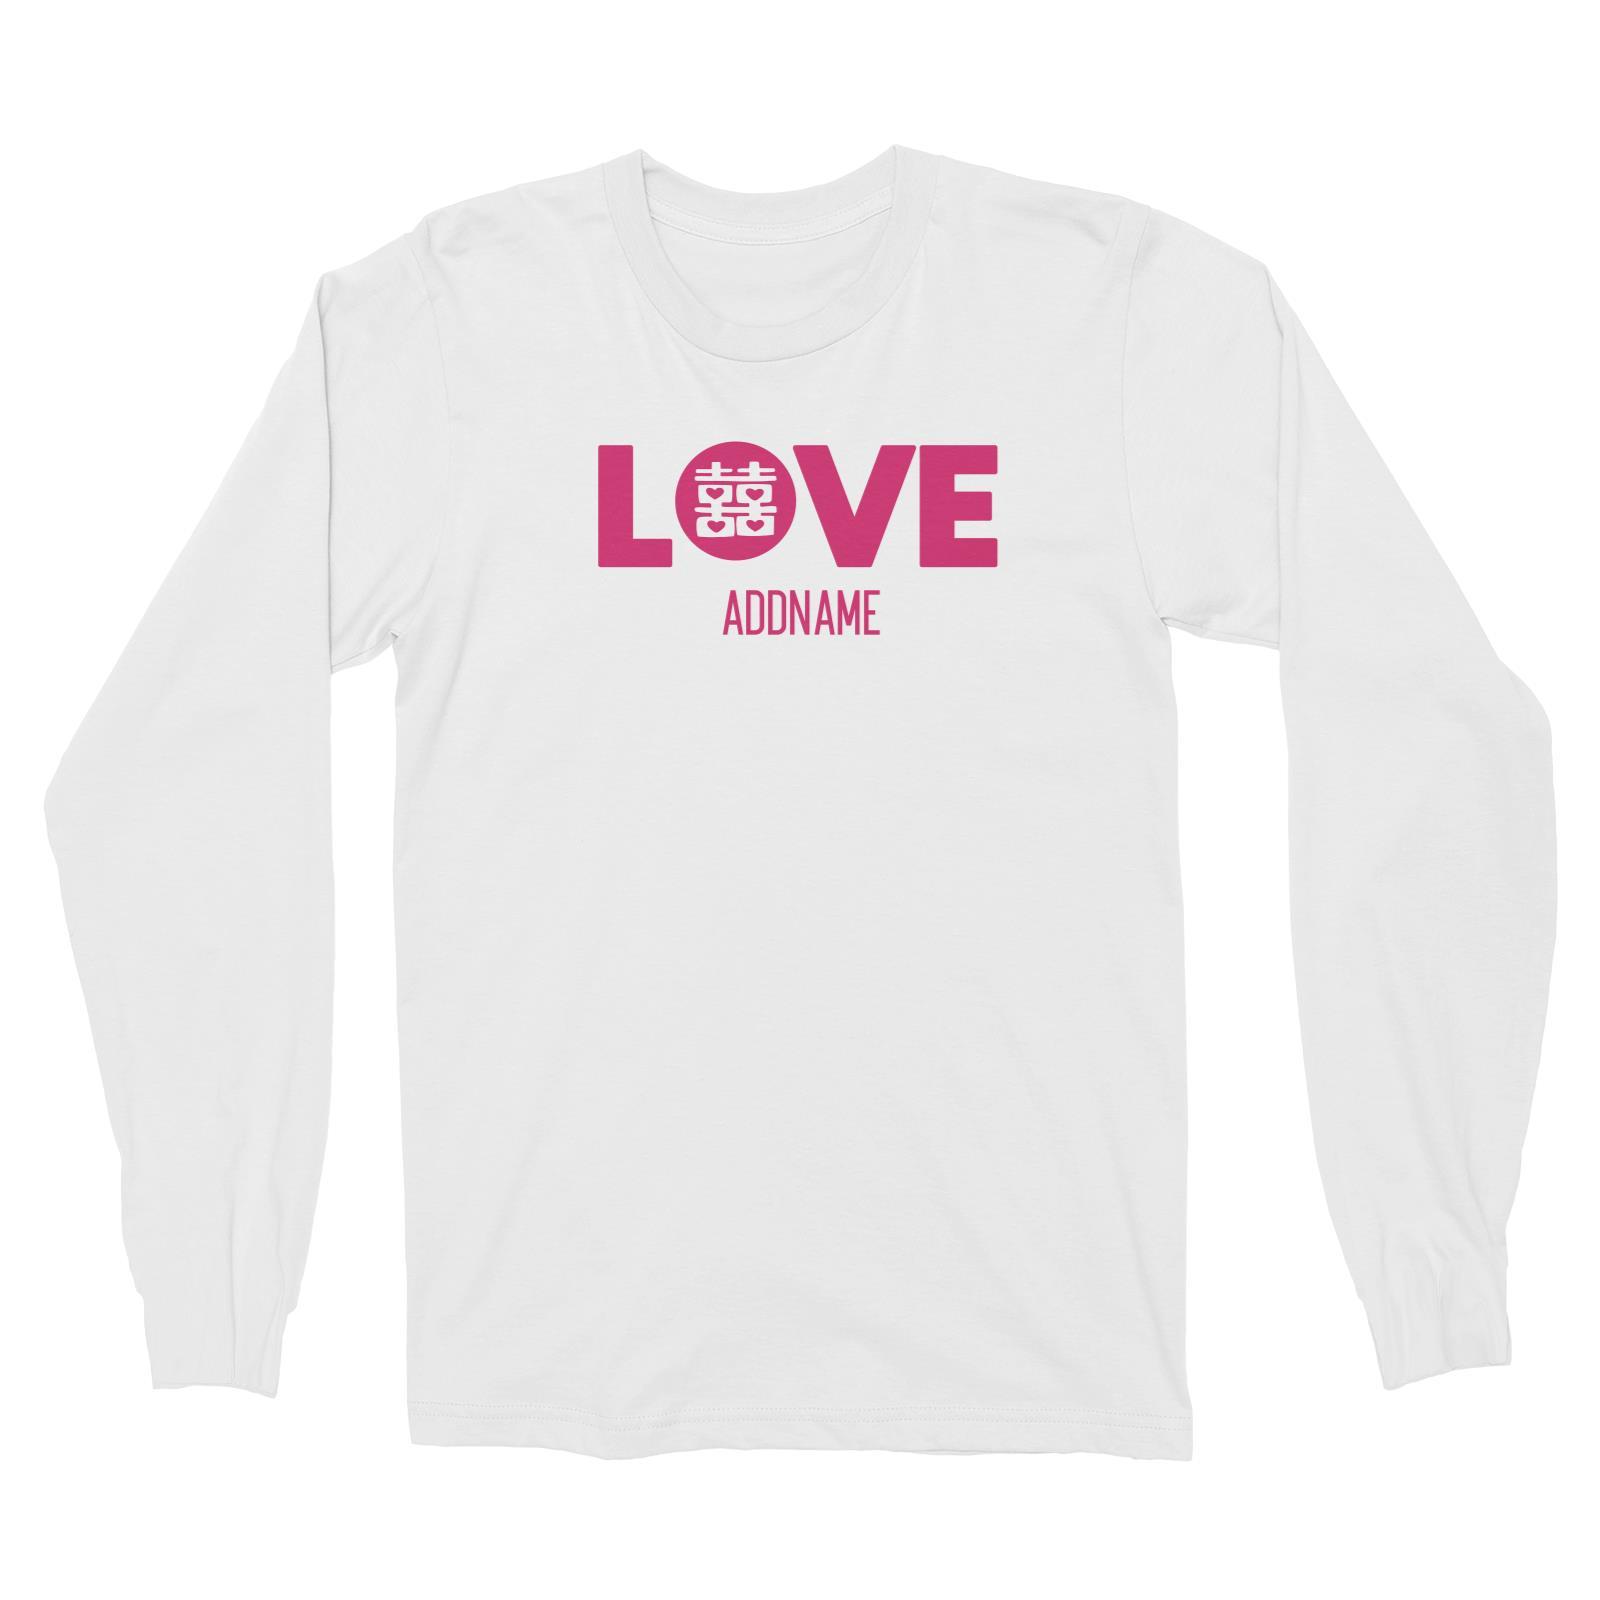 Love In Double Happiness Addname Long Sleeve Unisex T-Shirt